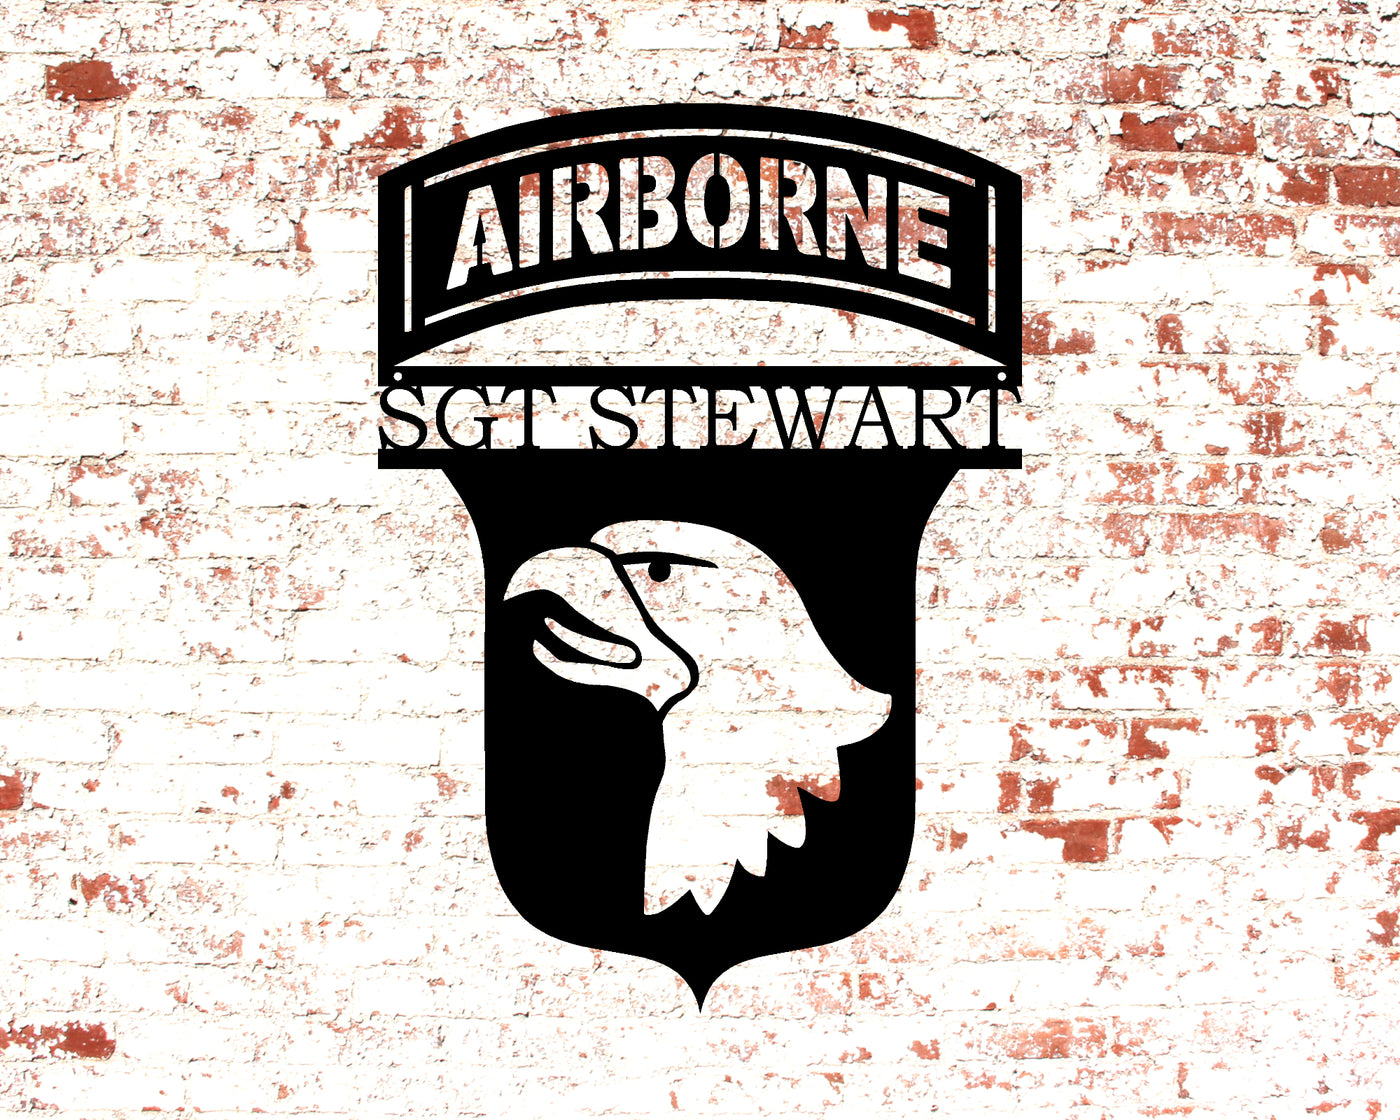 Personalized 101st Airborne Metal Sign with Rank and Name - Madison Iron and Wood - Personalized sign - metal outdoor decor - Steel deocrations - american made products - veteran owned business products - fencing decorations - fencing supplies - custom wall decorations - personalized wall signs - steel - decorative post caps - steel post caps - metal post caps - brackets - structural brackets - home improvement - easter - easter decorations - easter gift - easter yard decor